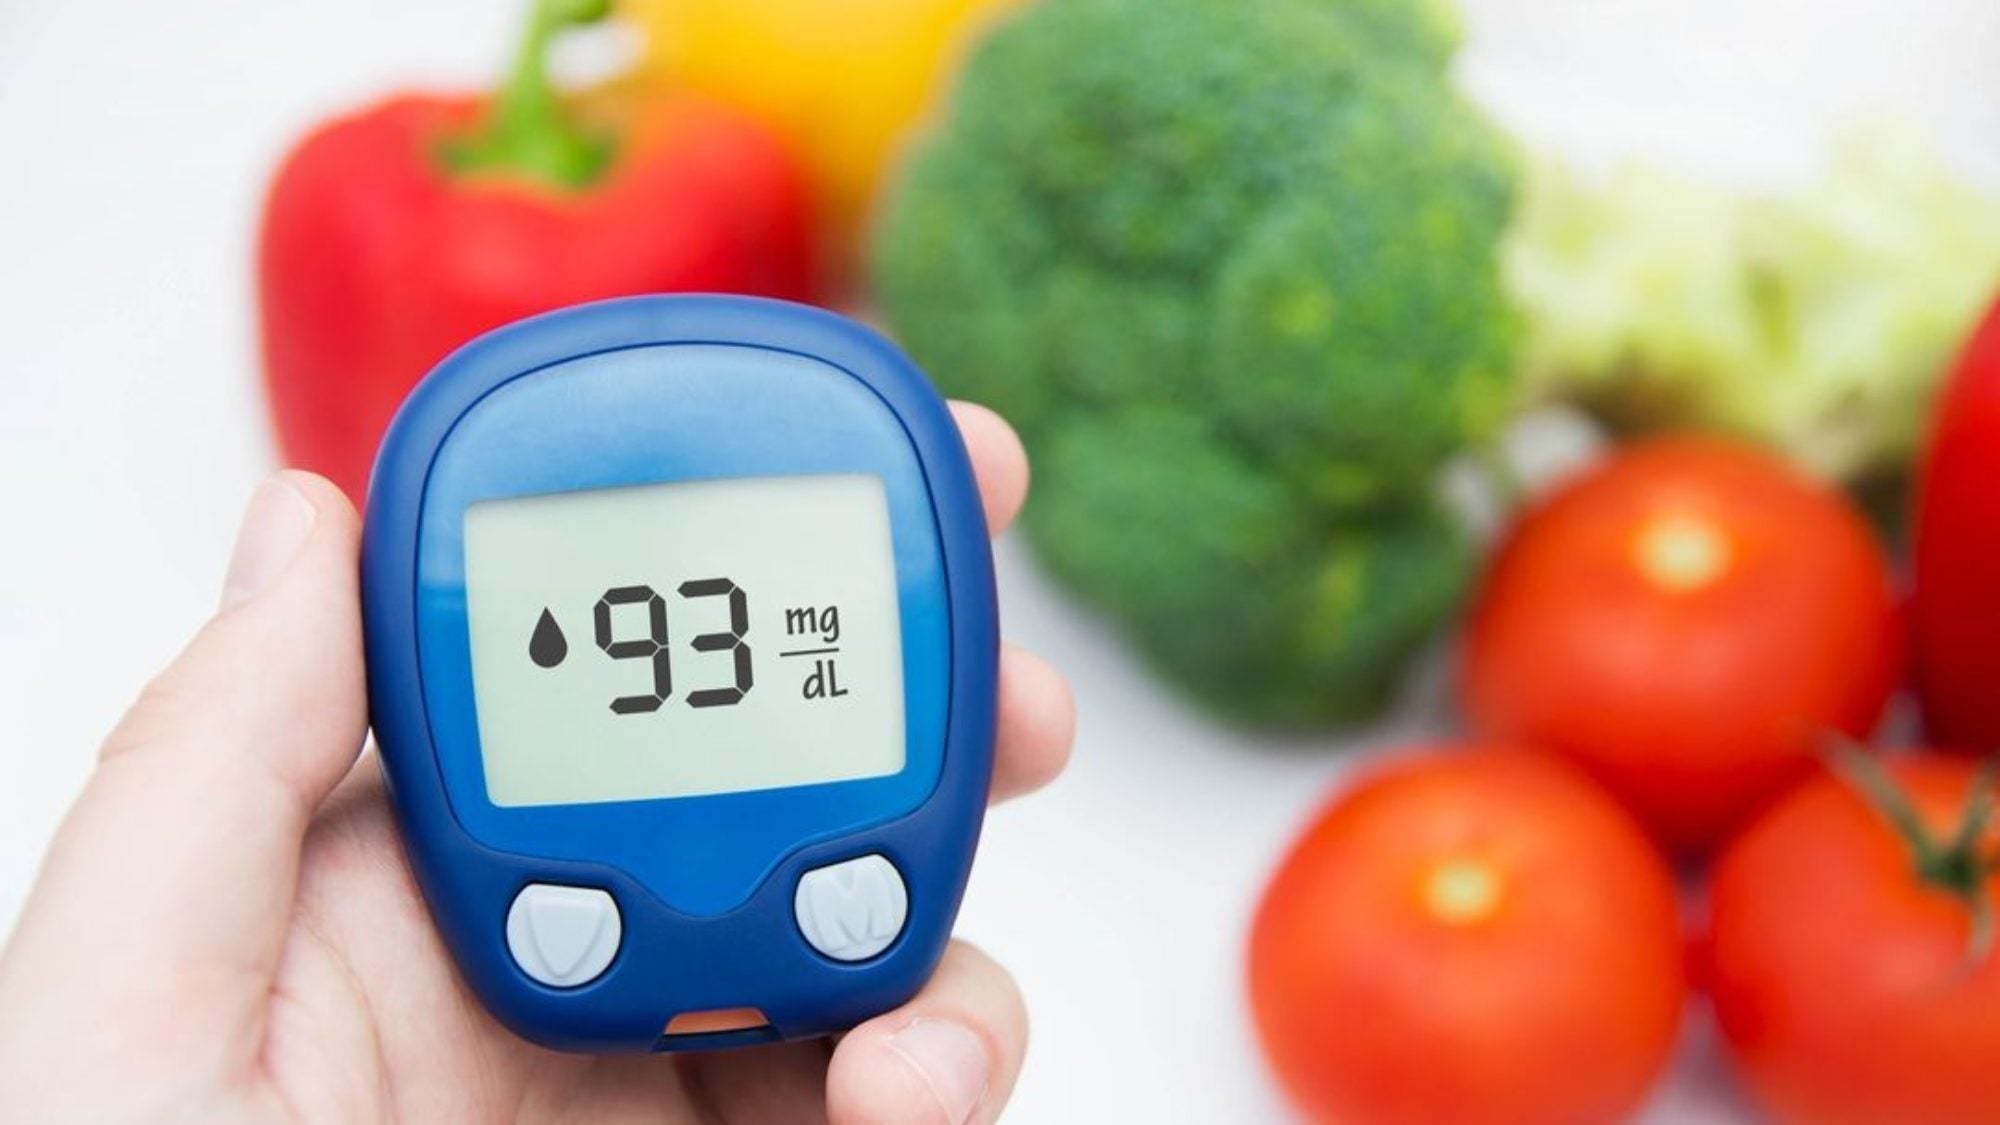 Foods That Won't Spike Your Blood Sugar Levels